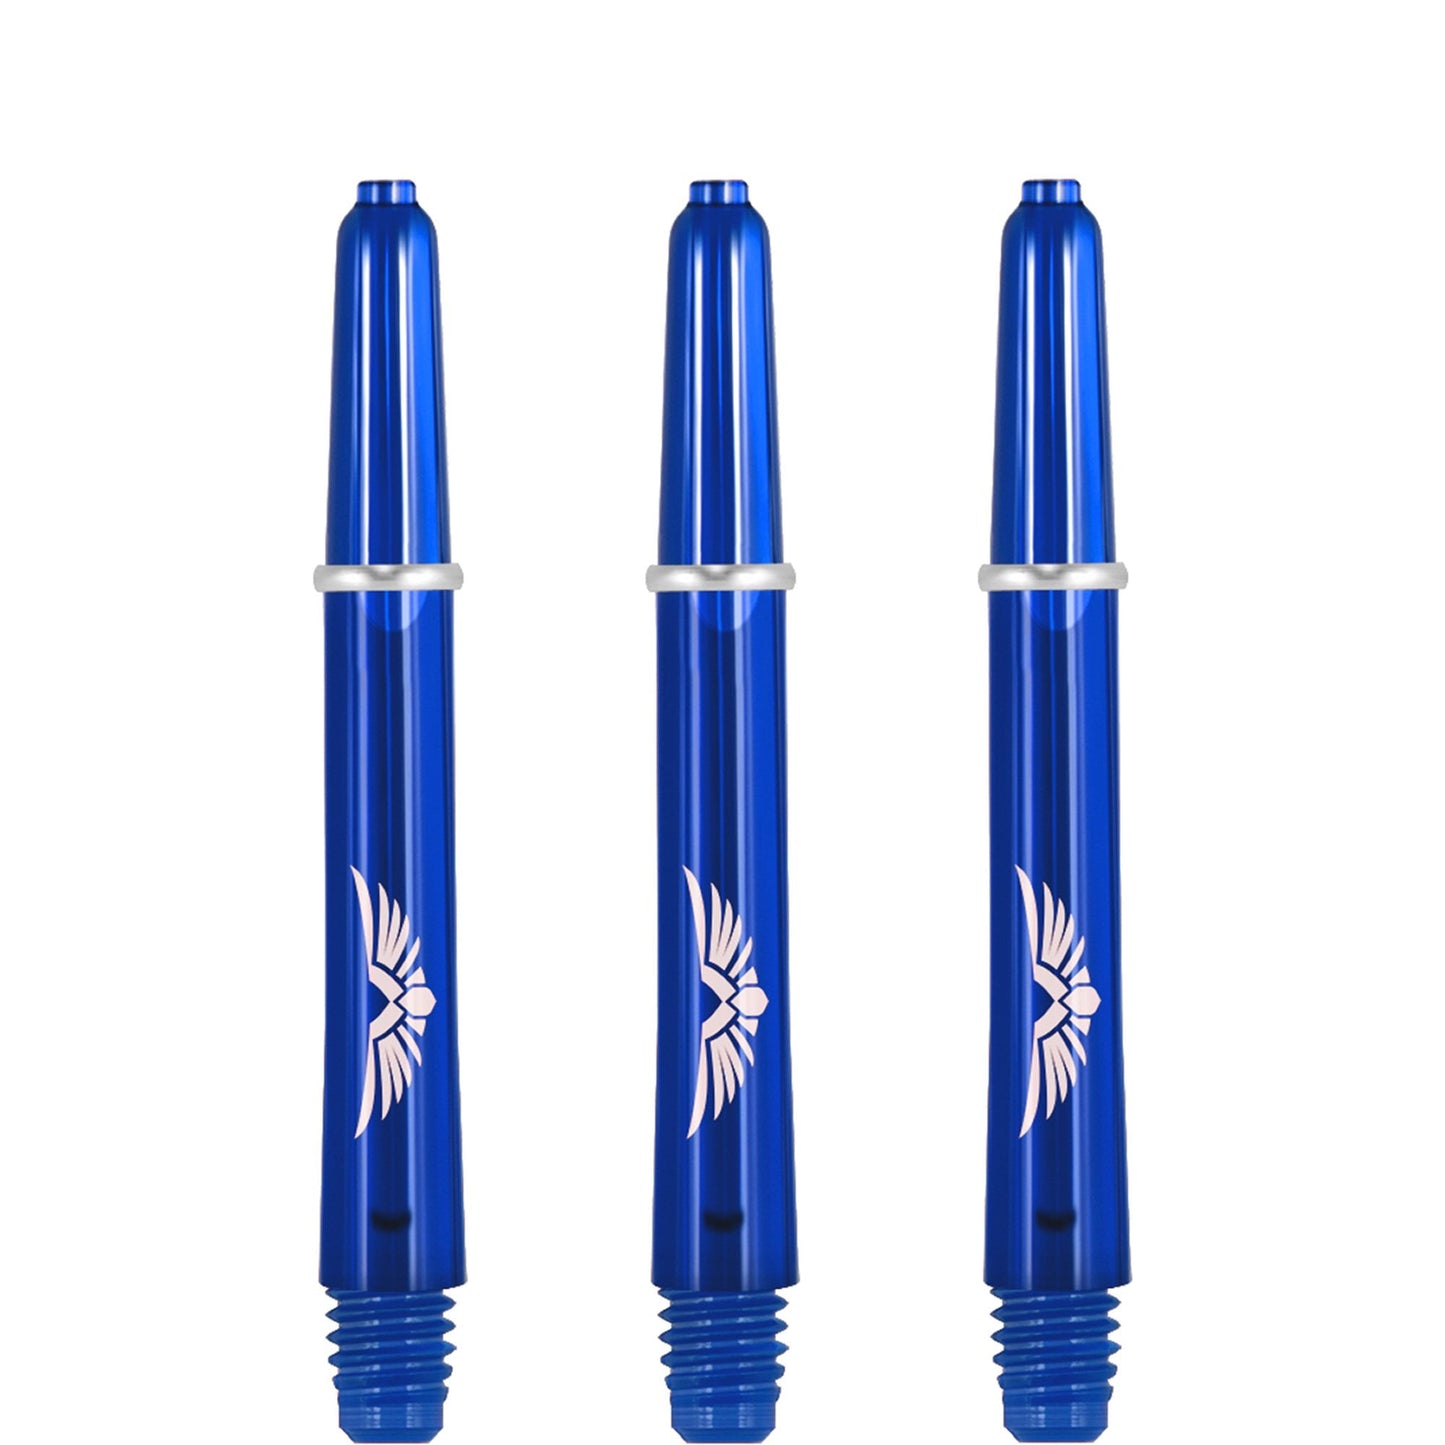 Shot Eagle Claw Dart Shafts - with Machined Rings - Strong Polycarbonate Stems - Blue Tweenie